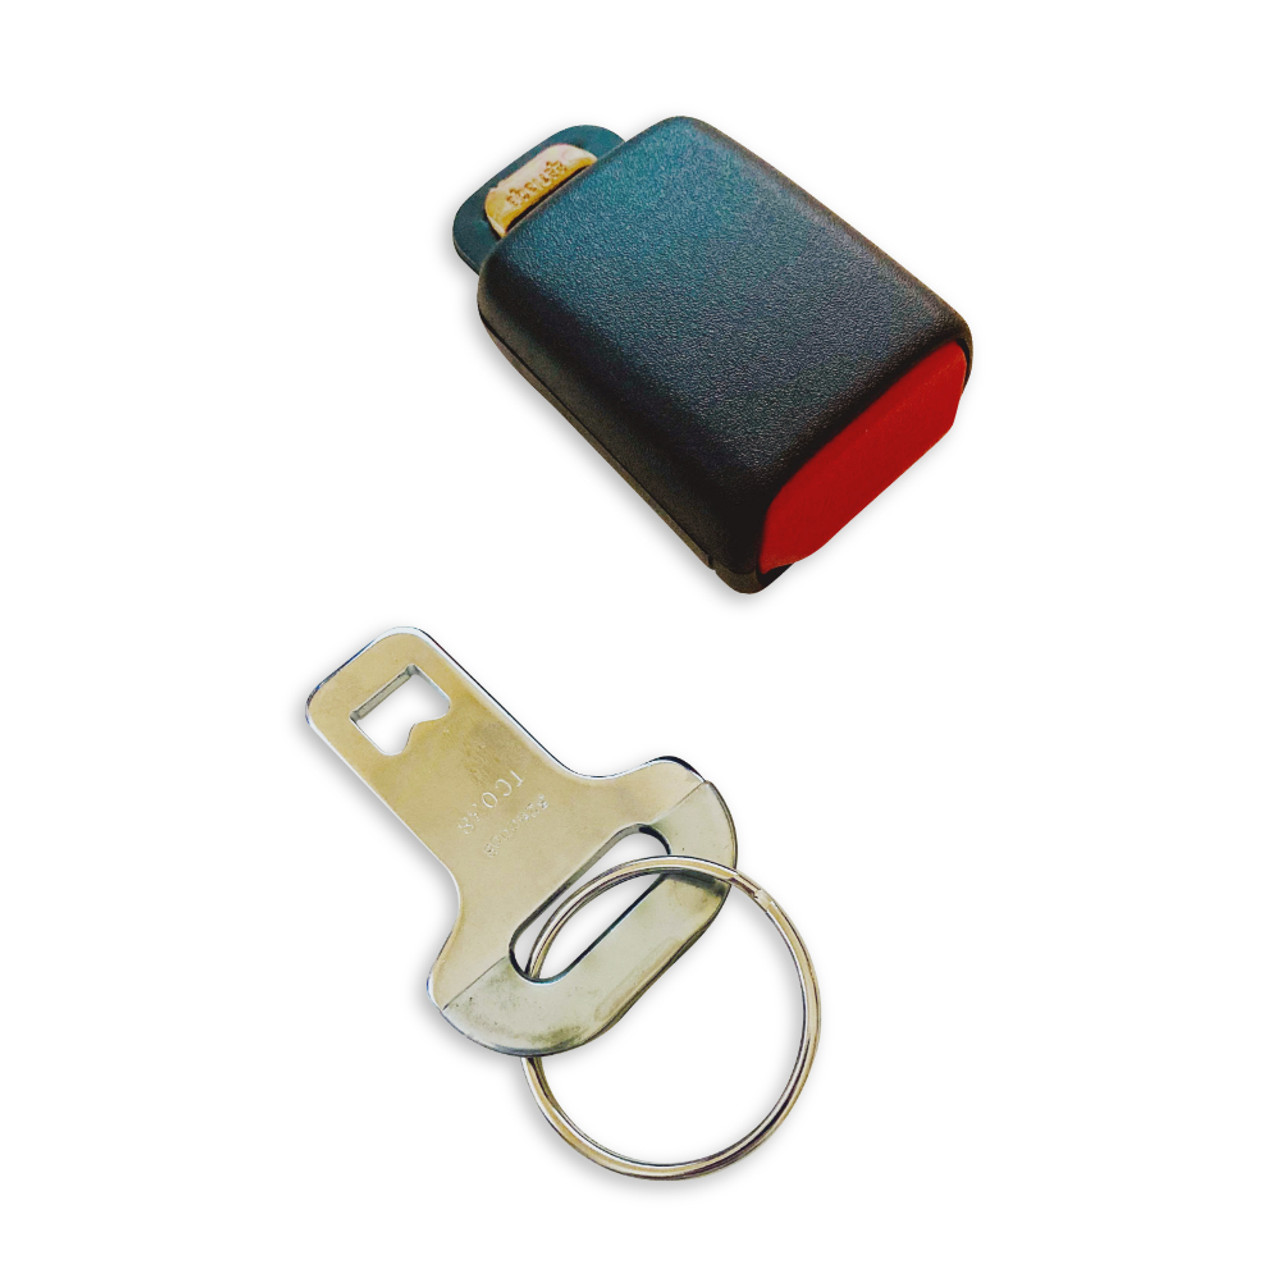 Shop for and Buy Seat Belt Buckle Key Holder with Keychain at .  Large selection and bulk discounts available.